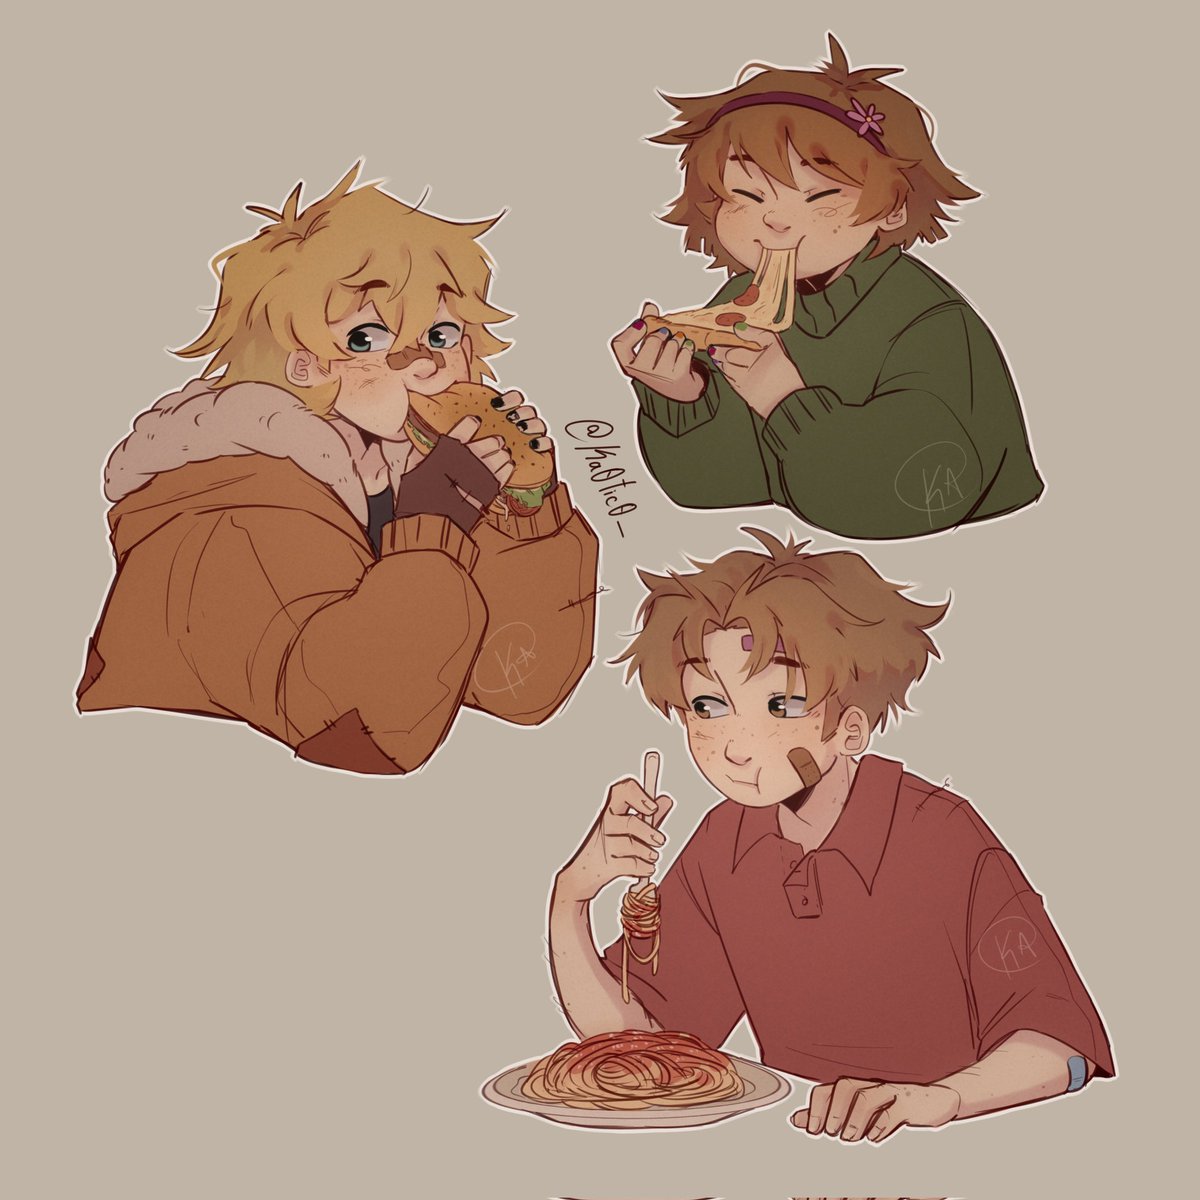 Favorite meals¡! <33 
They ate those like,, twice in their lives but shh, they deserve to be happy 

#SouthPark #KennyMcCormick #KarenMcCormick #KevinMcCormick